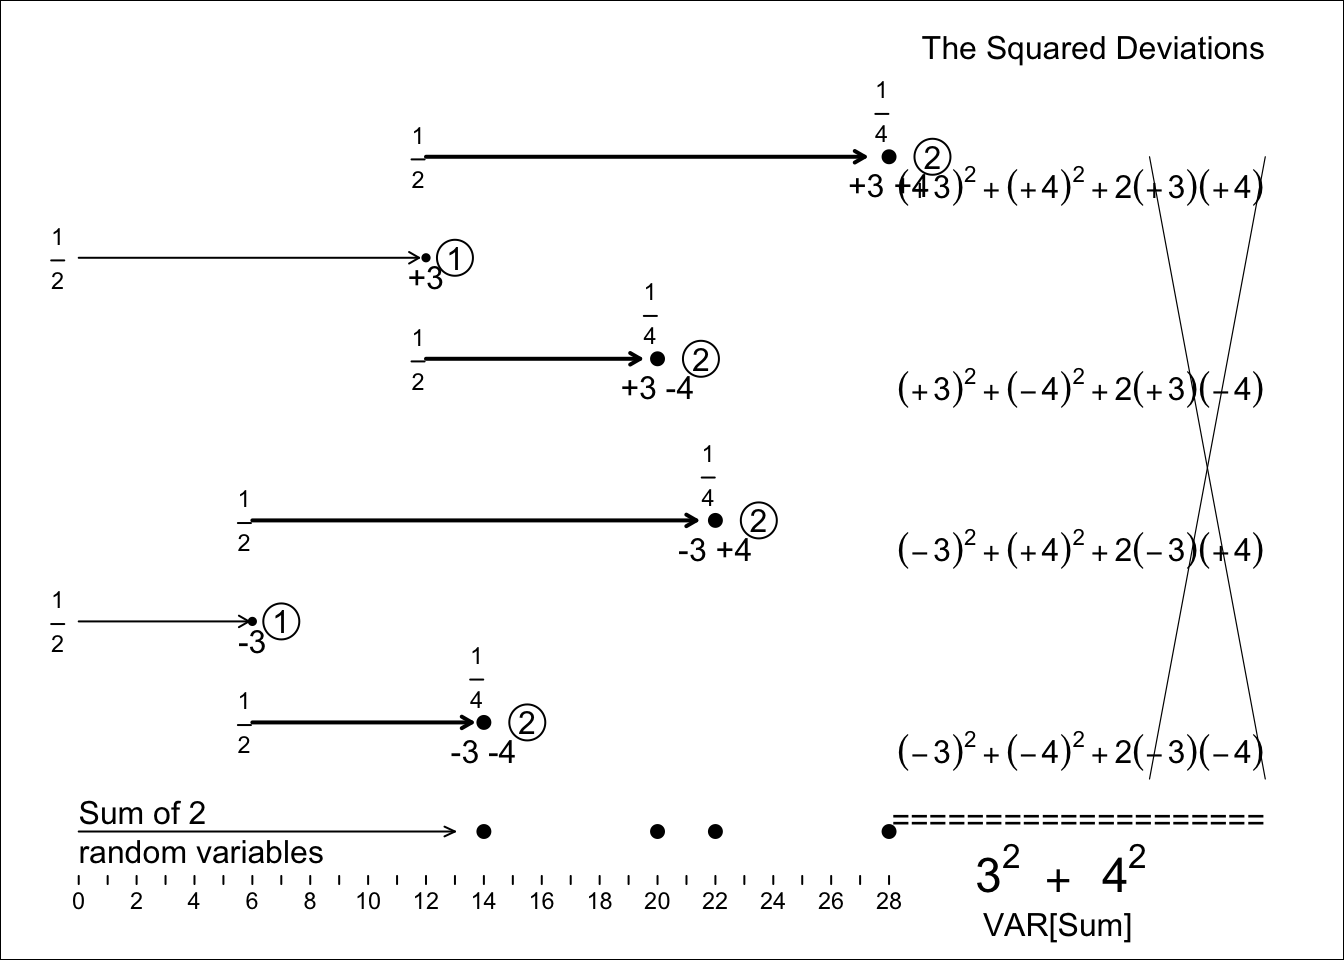 Variance (and thus SD) of the SUM of the two independent random variables, RV1 and RV2, shown above. Each of the 4 equally likely deviations of the sum from its expectation is decomposed into its 2 components. This, (by the expansion rule for (a+b) squared that you learned in high school), each squared deviation becomes a sum of 2 squares, and a 'cross-product'. But the 4 cross-products cancel each other, and you are left with the sums of two squares, the original 3-squared and the  original 4-squared, i.e. the variances of RV1 and RV2.